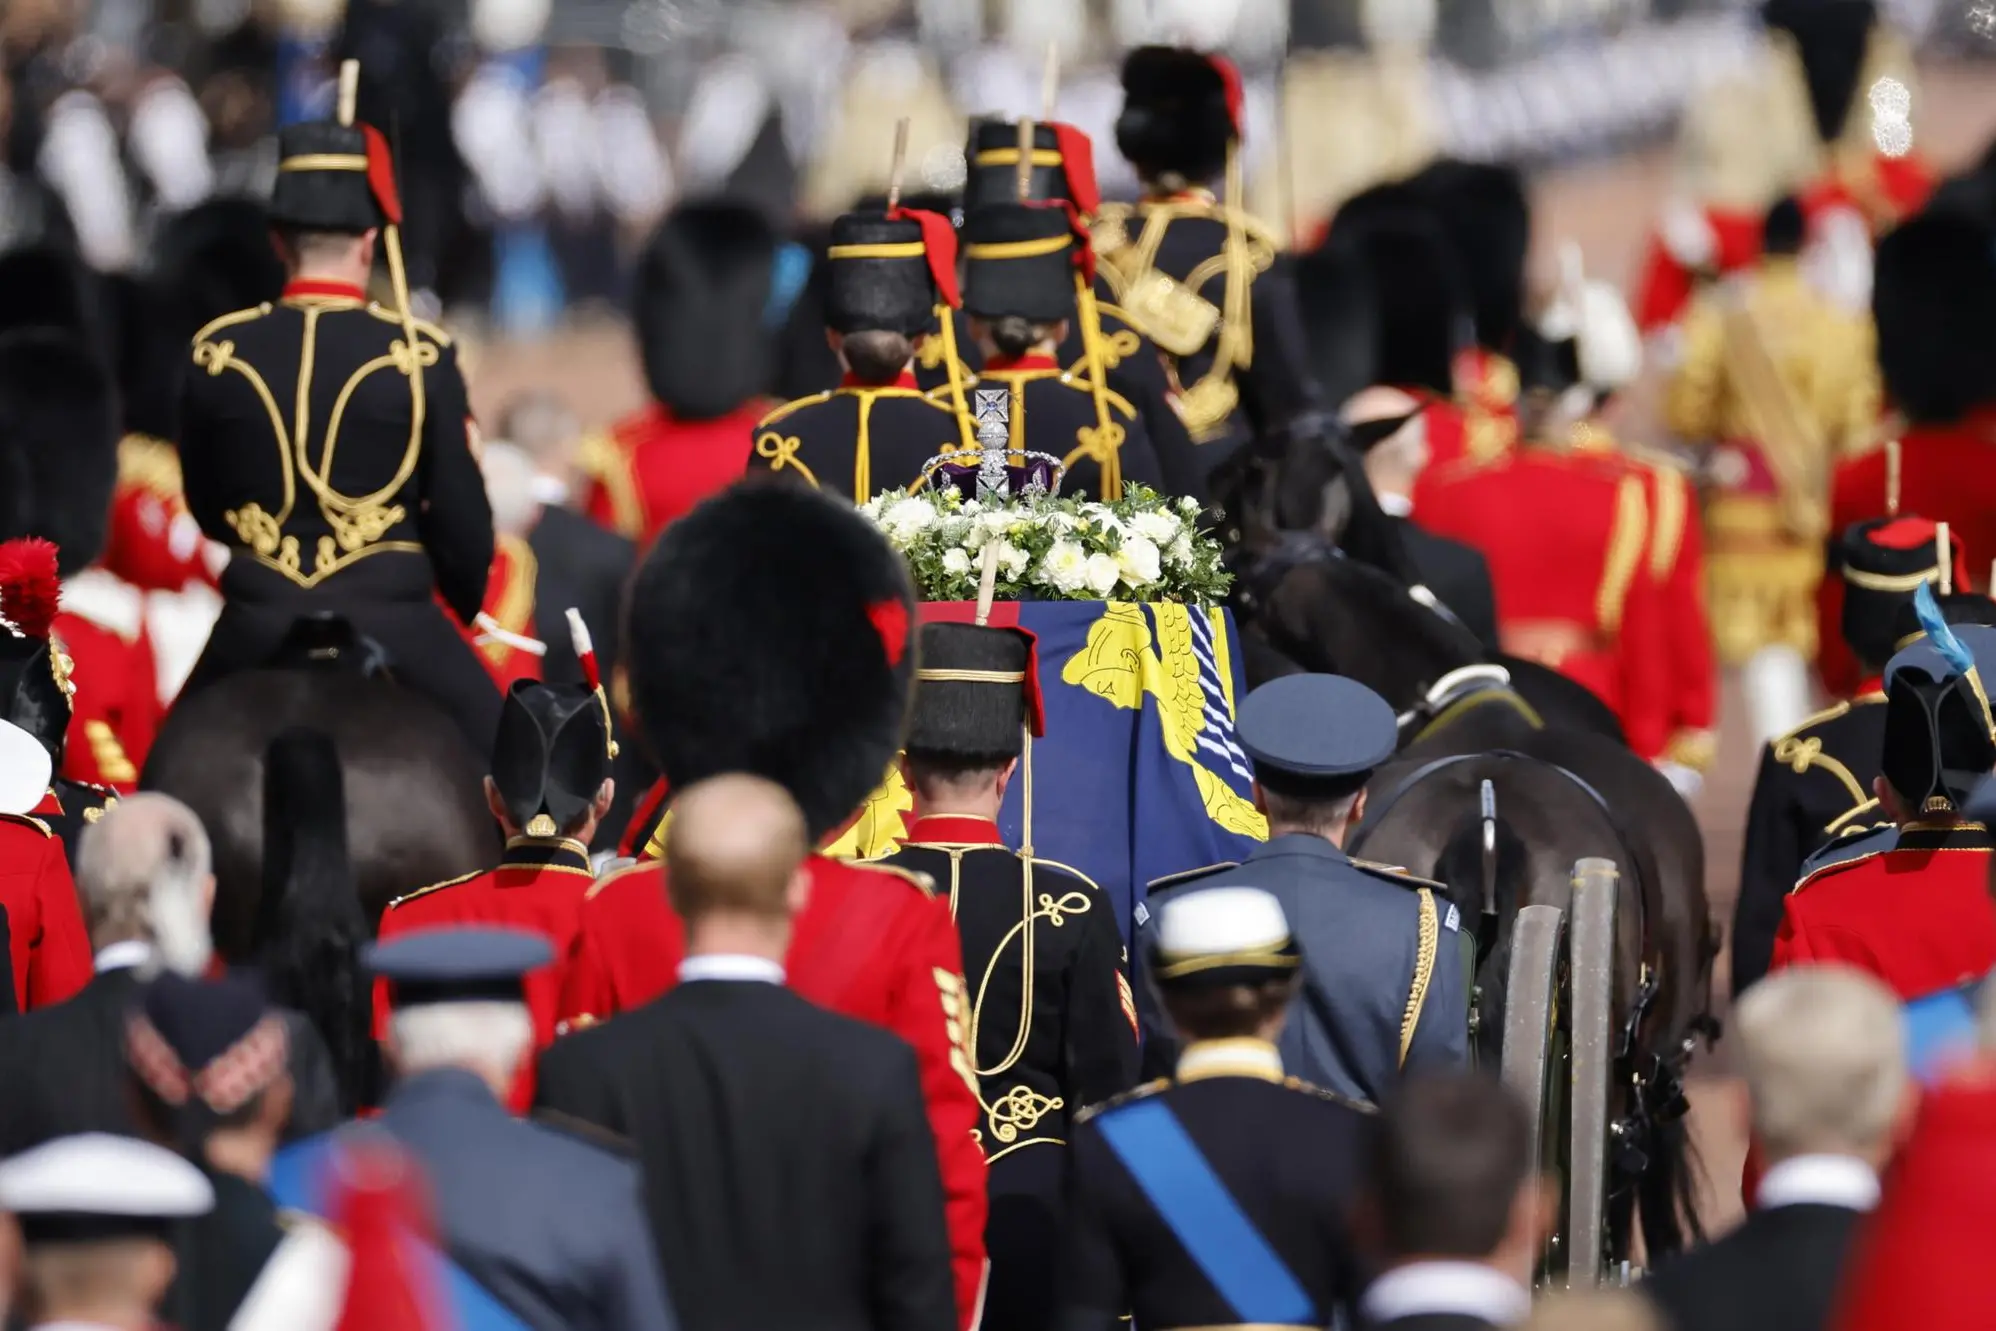 epa10183699 The coffin containing the body of Britain's Queen Elizabeth II, draped in the royal standard with the Imperial State Crown on top, is transported on a gun carriage of the King's Troop Royal Horse Artillery from Buckingham Palace to Westminster Hall followed by members of the royal family in London, Britain, 14 September 2022. After a short service, the Queen’s lying in state will begin, lasting for four days and ending on the morning of the state funeral on the 19 September. EPA/TOLGA AKMEN